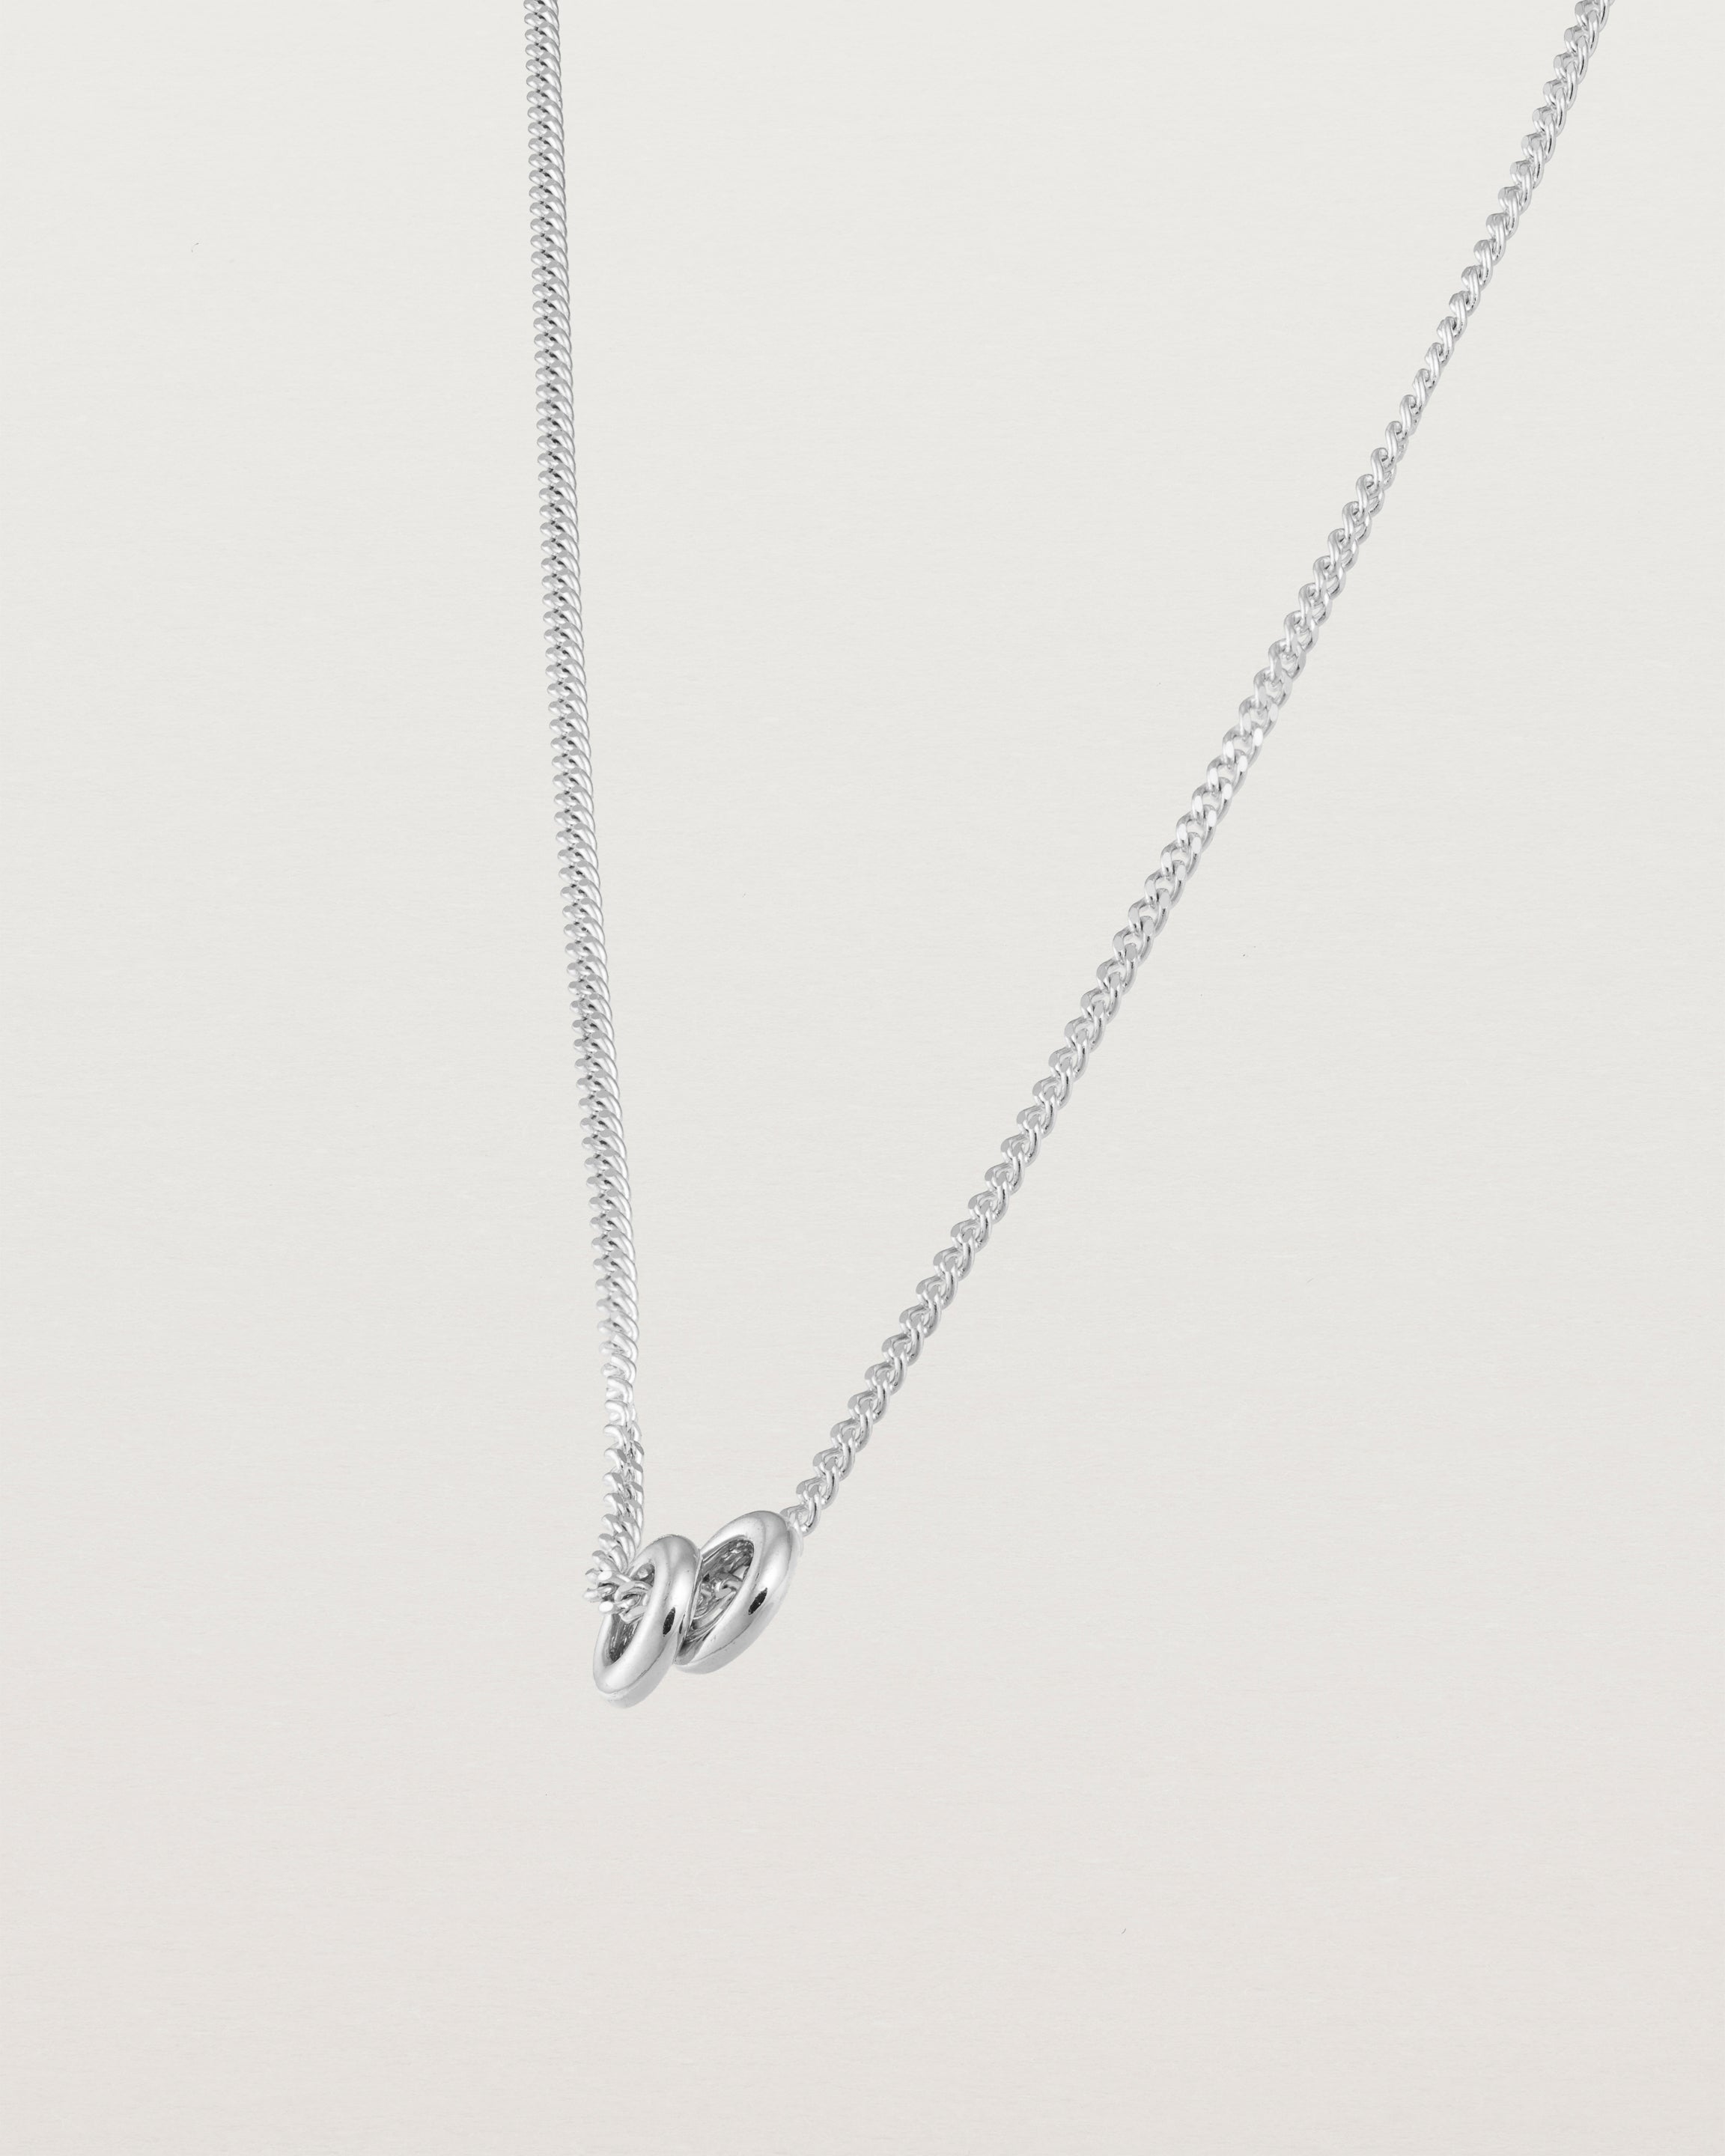 Aether necklace in white gold with two round charms